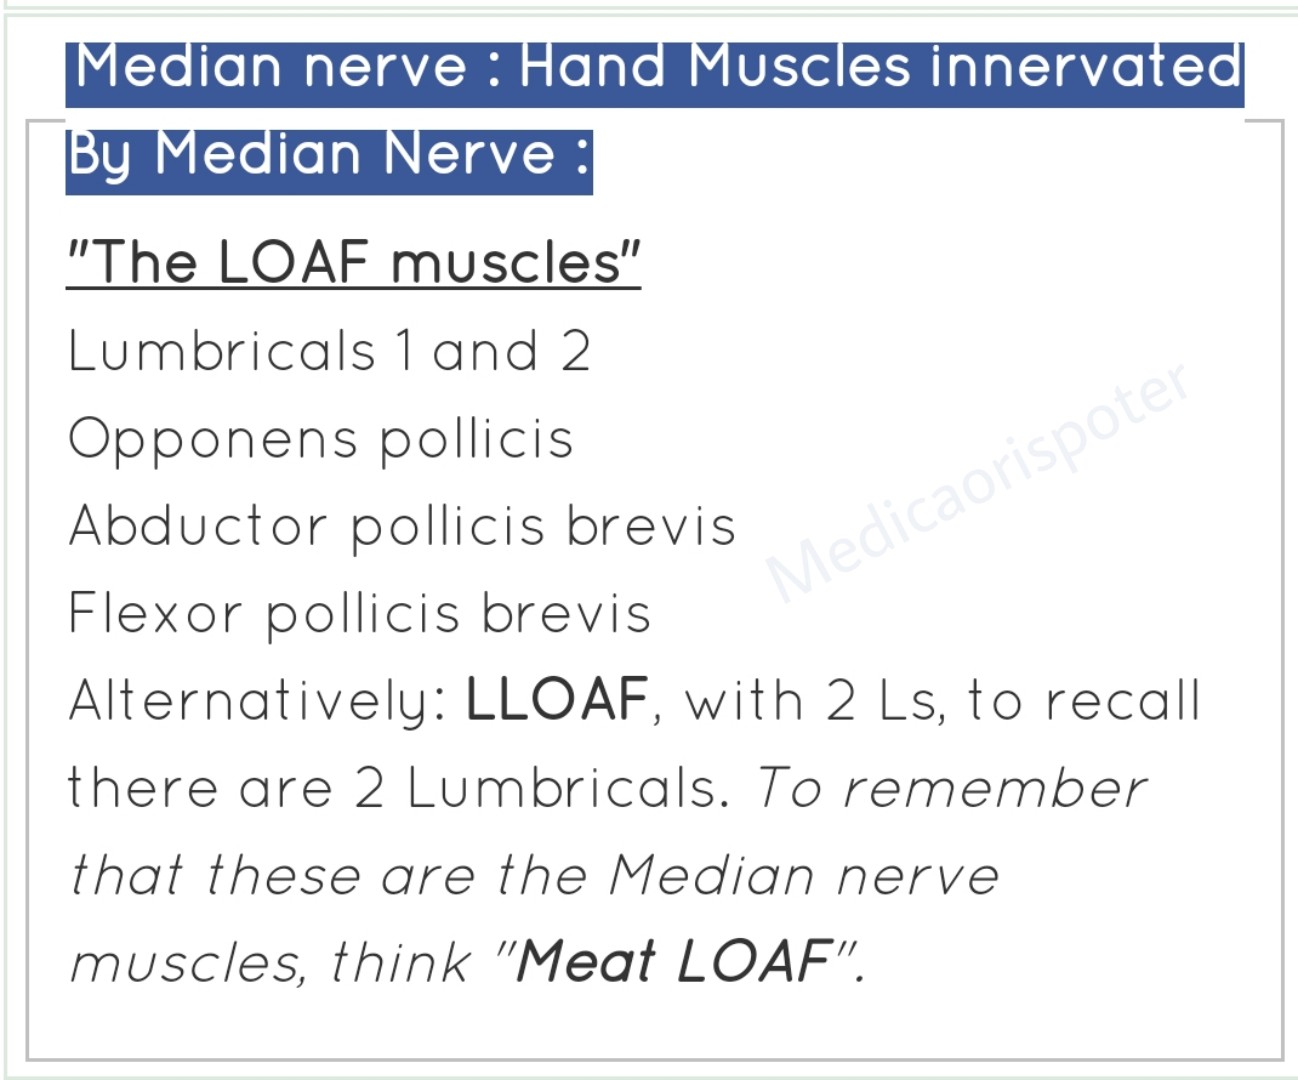 preview of Hand Muscles innervated By Median Nerve.jpg